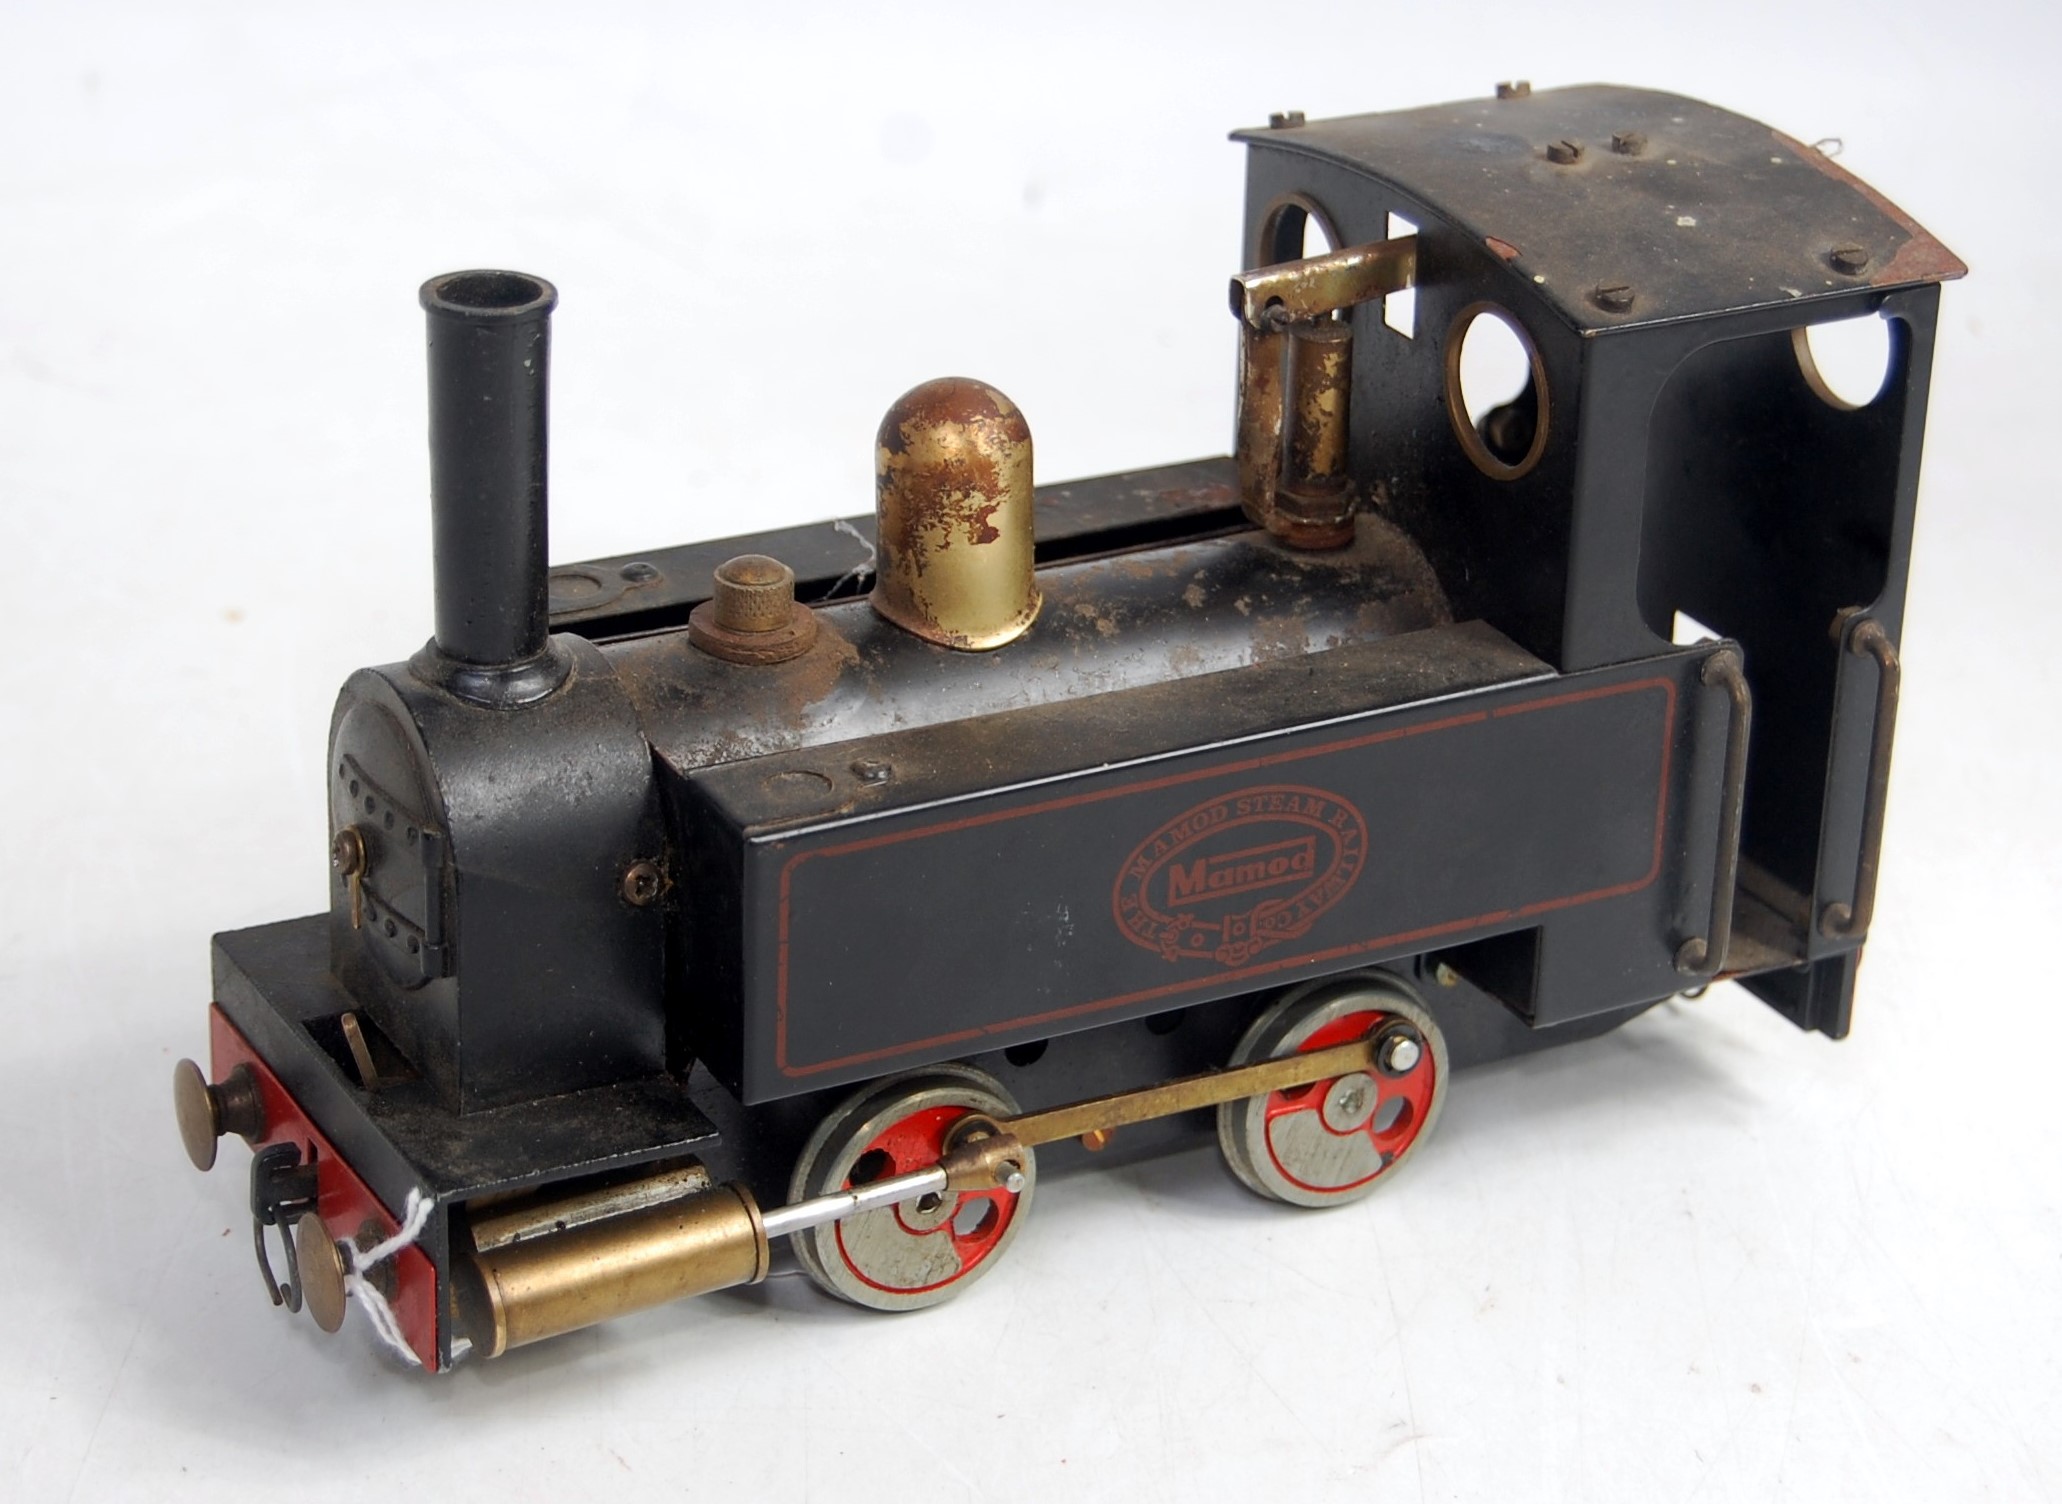 A Mamod SR1 0-4-0 locomotive comprising black body with red lining and brass fittings with original